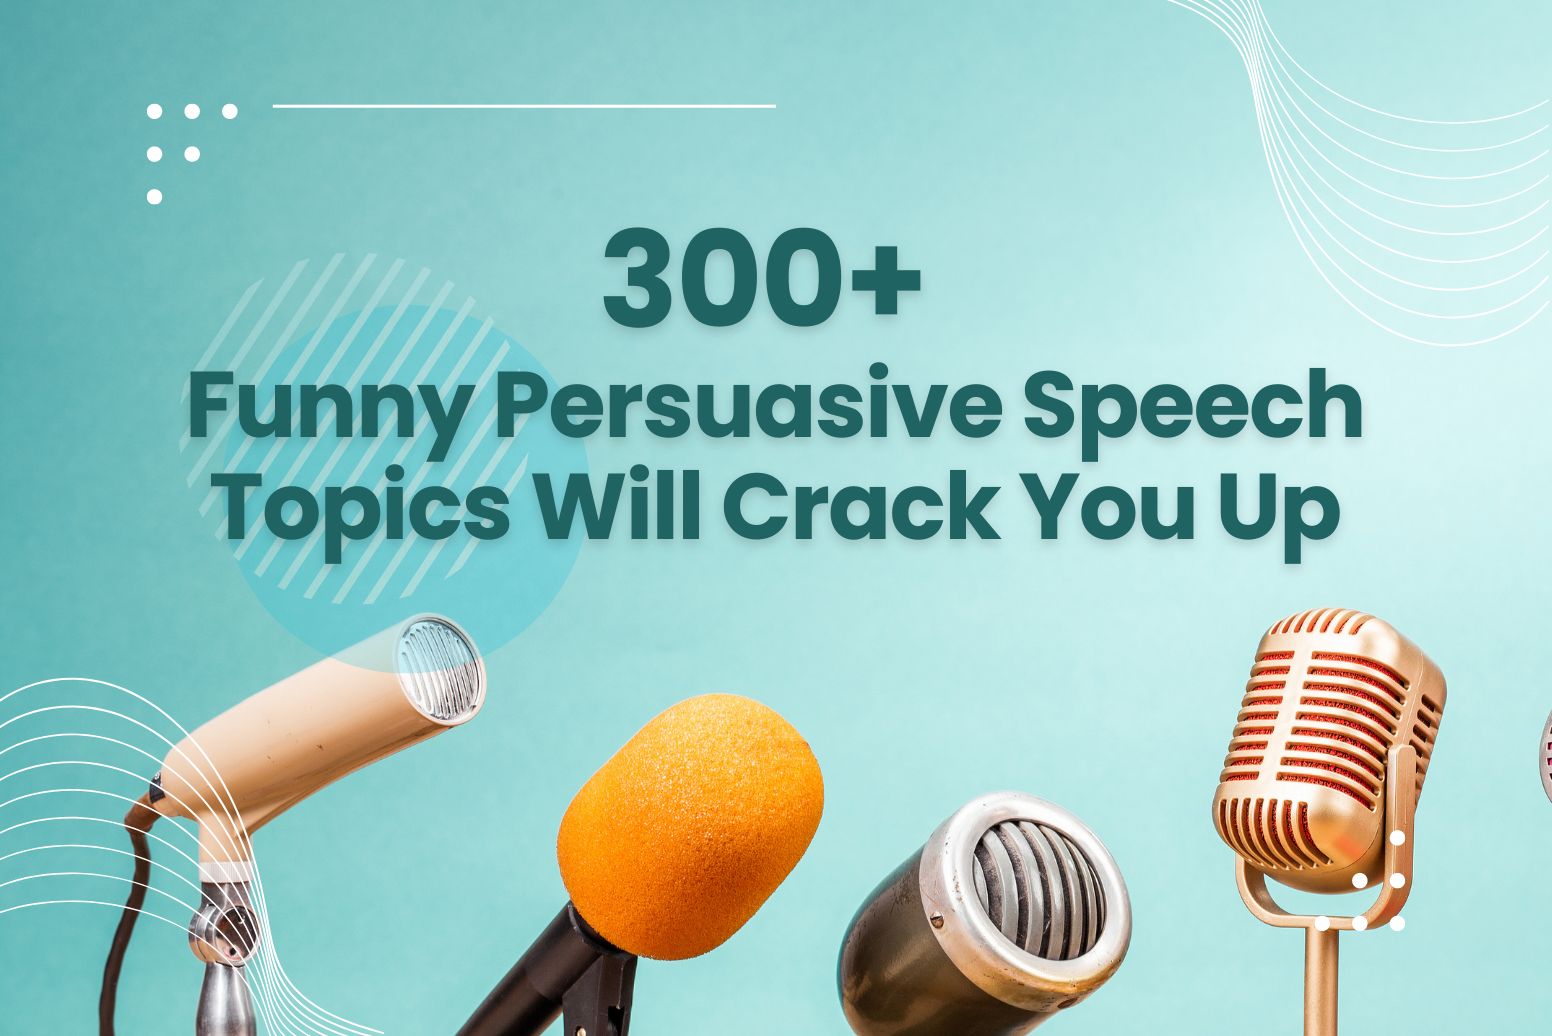 300+ Funny Persuasive Speech Topics That Will Crack You Up